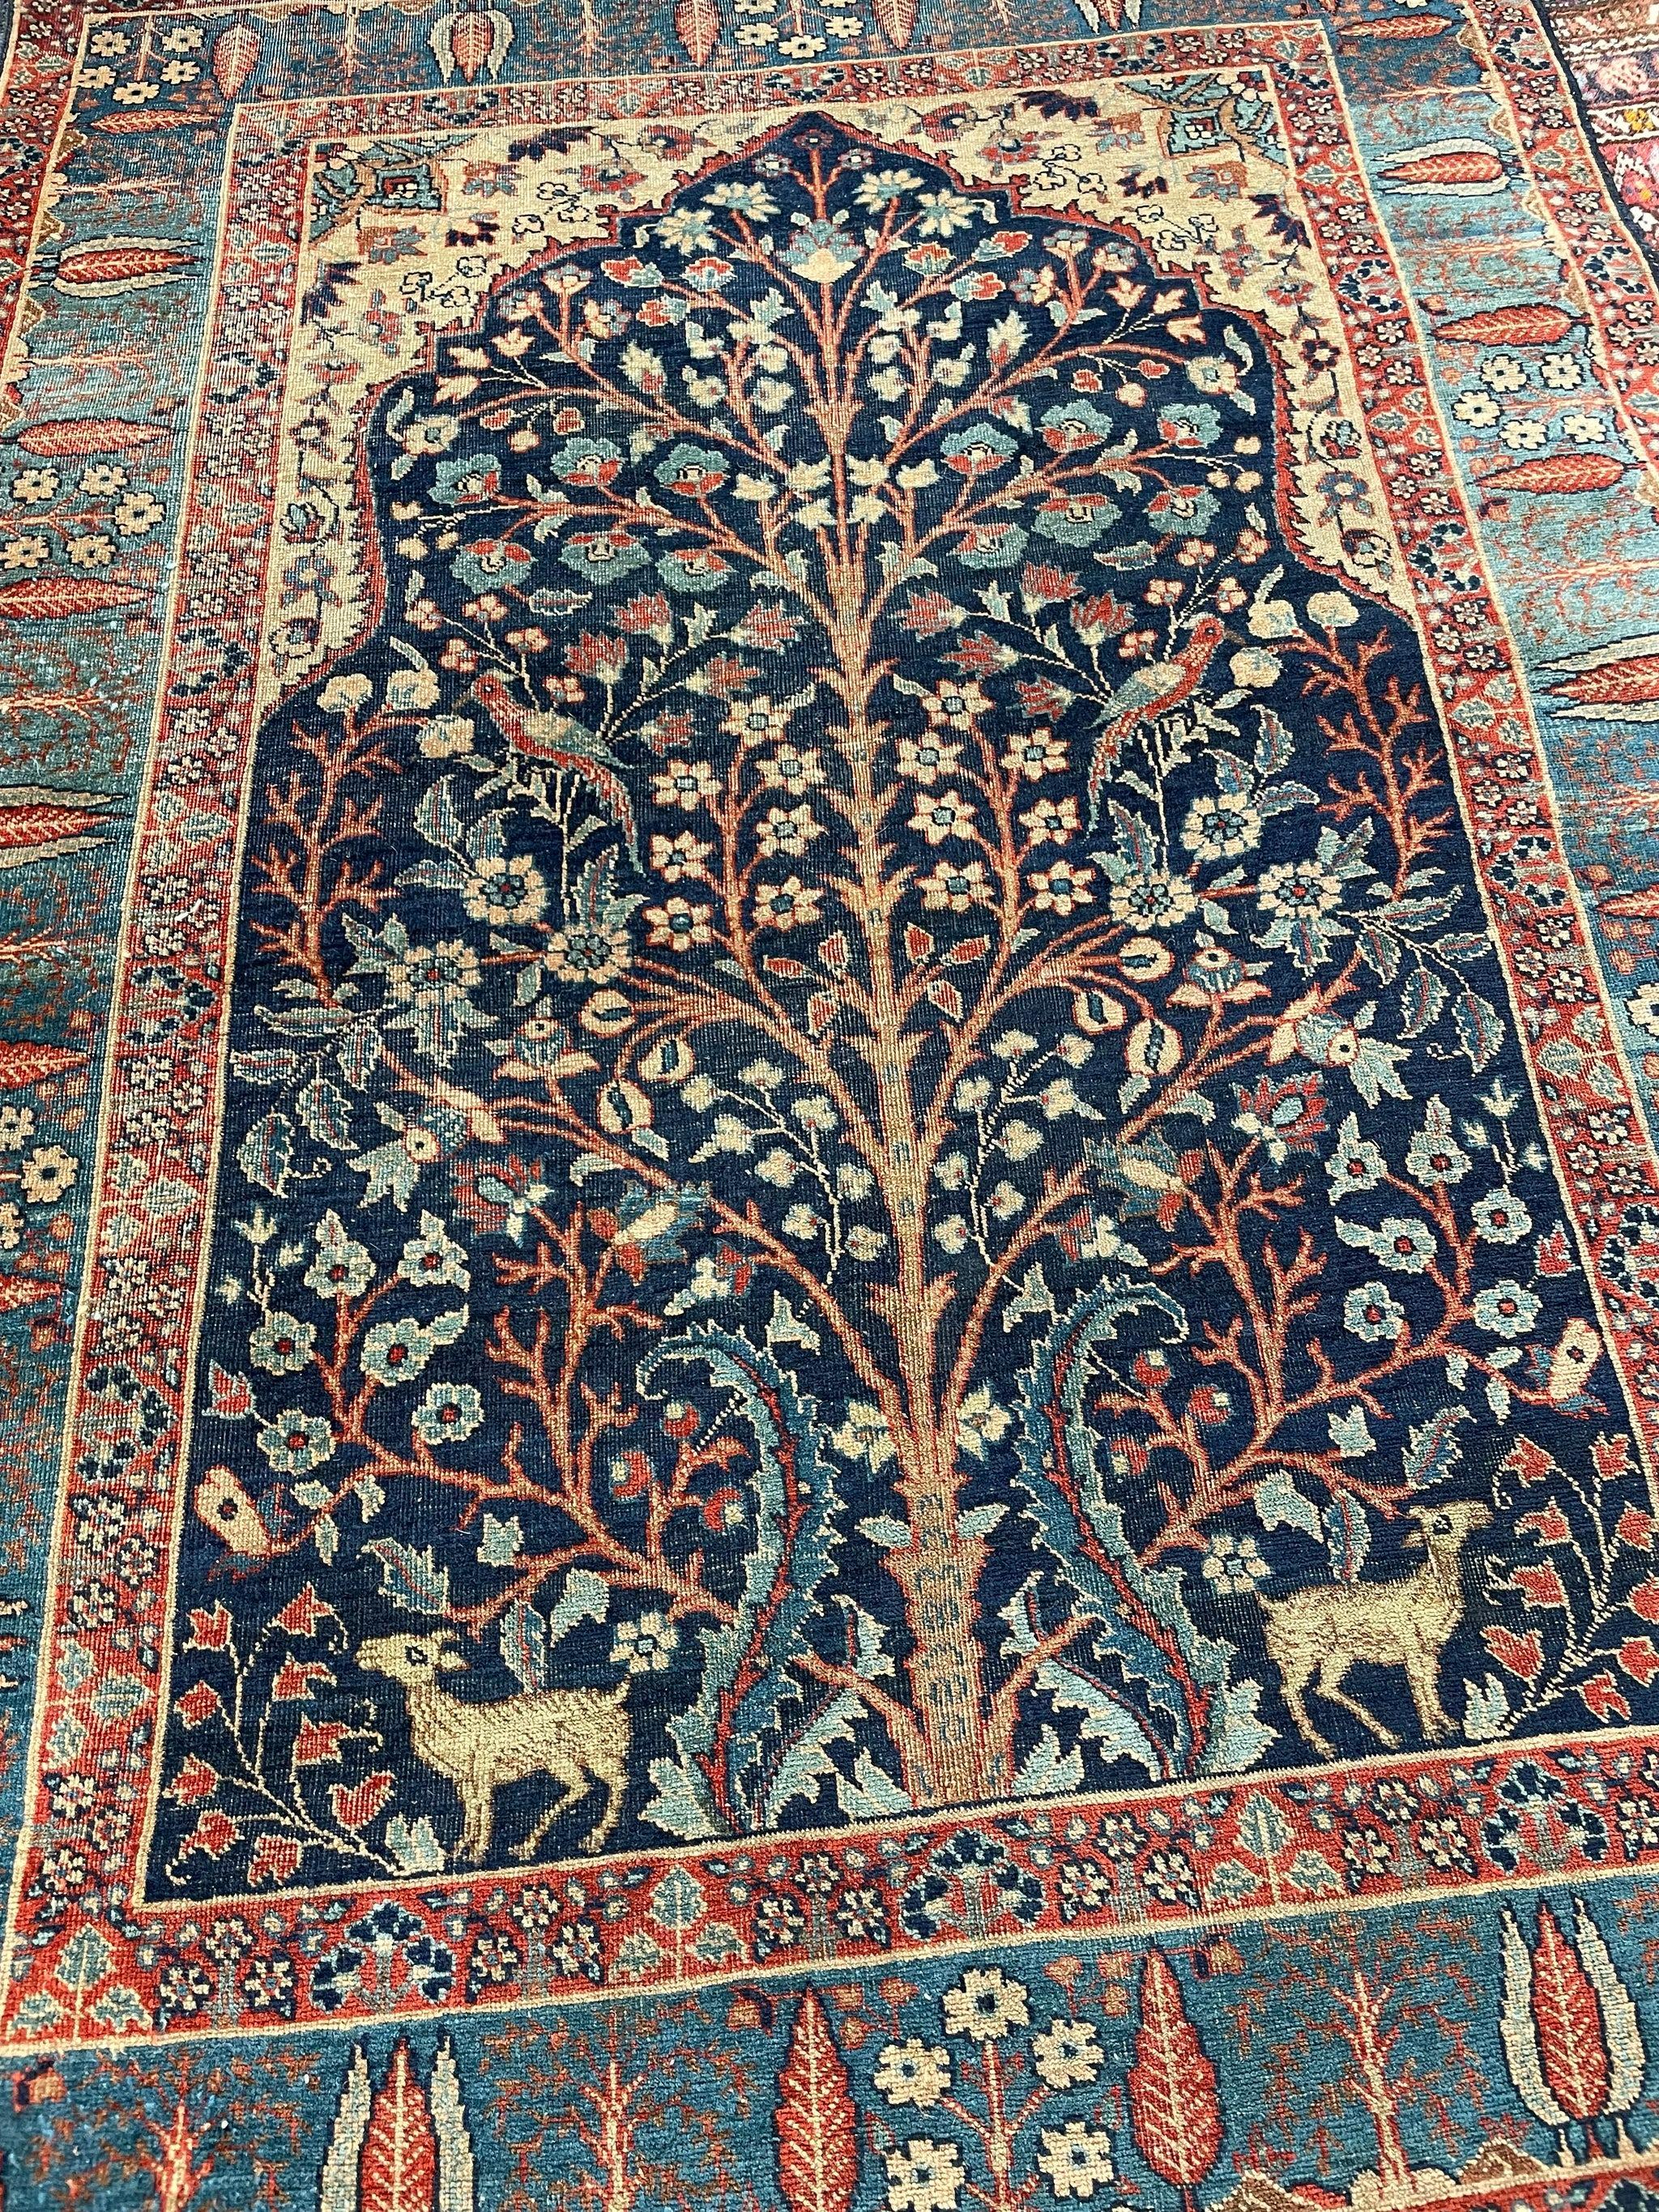 Amazing Paradise Tree of Life  Incredible Blues, Camel, Beige

Size: 4.7 x 6.1
Age: Antique, C. 1930-40's
Pile: Low with great wool 

This rug is one-of-a-kind, only one in the world, no others are available.

Because of the nature and age of these